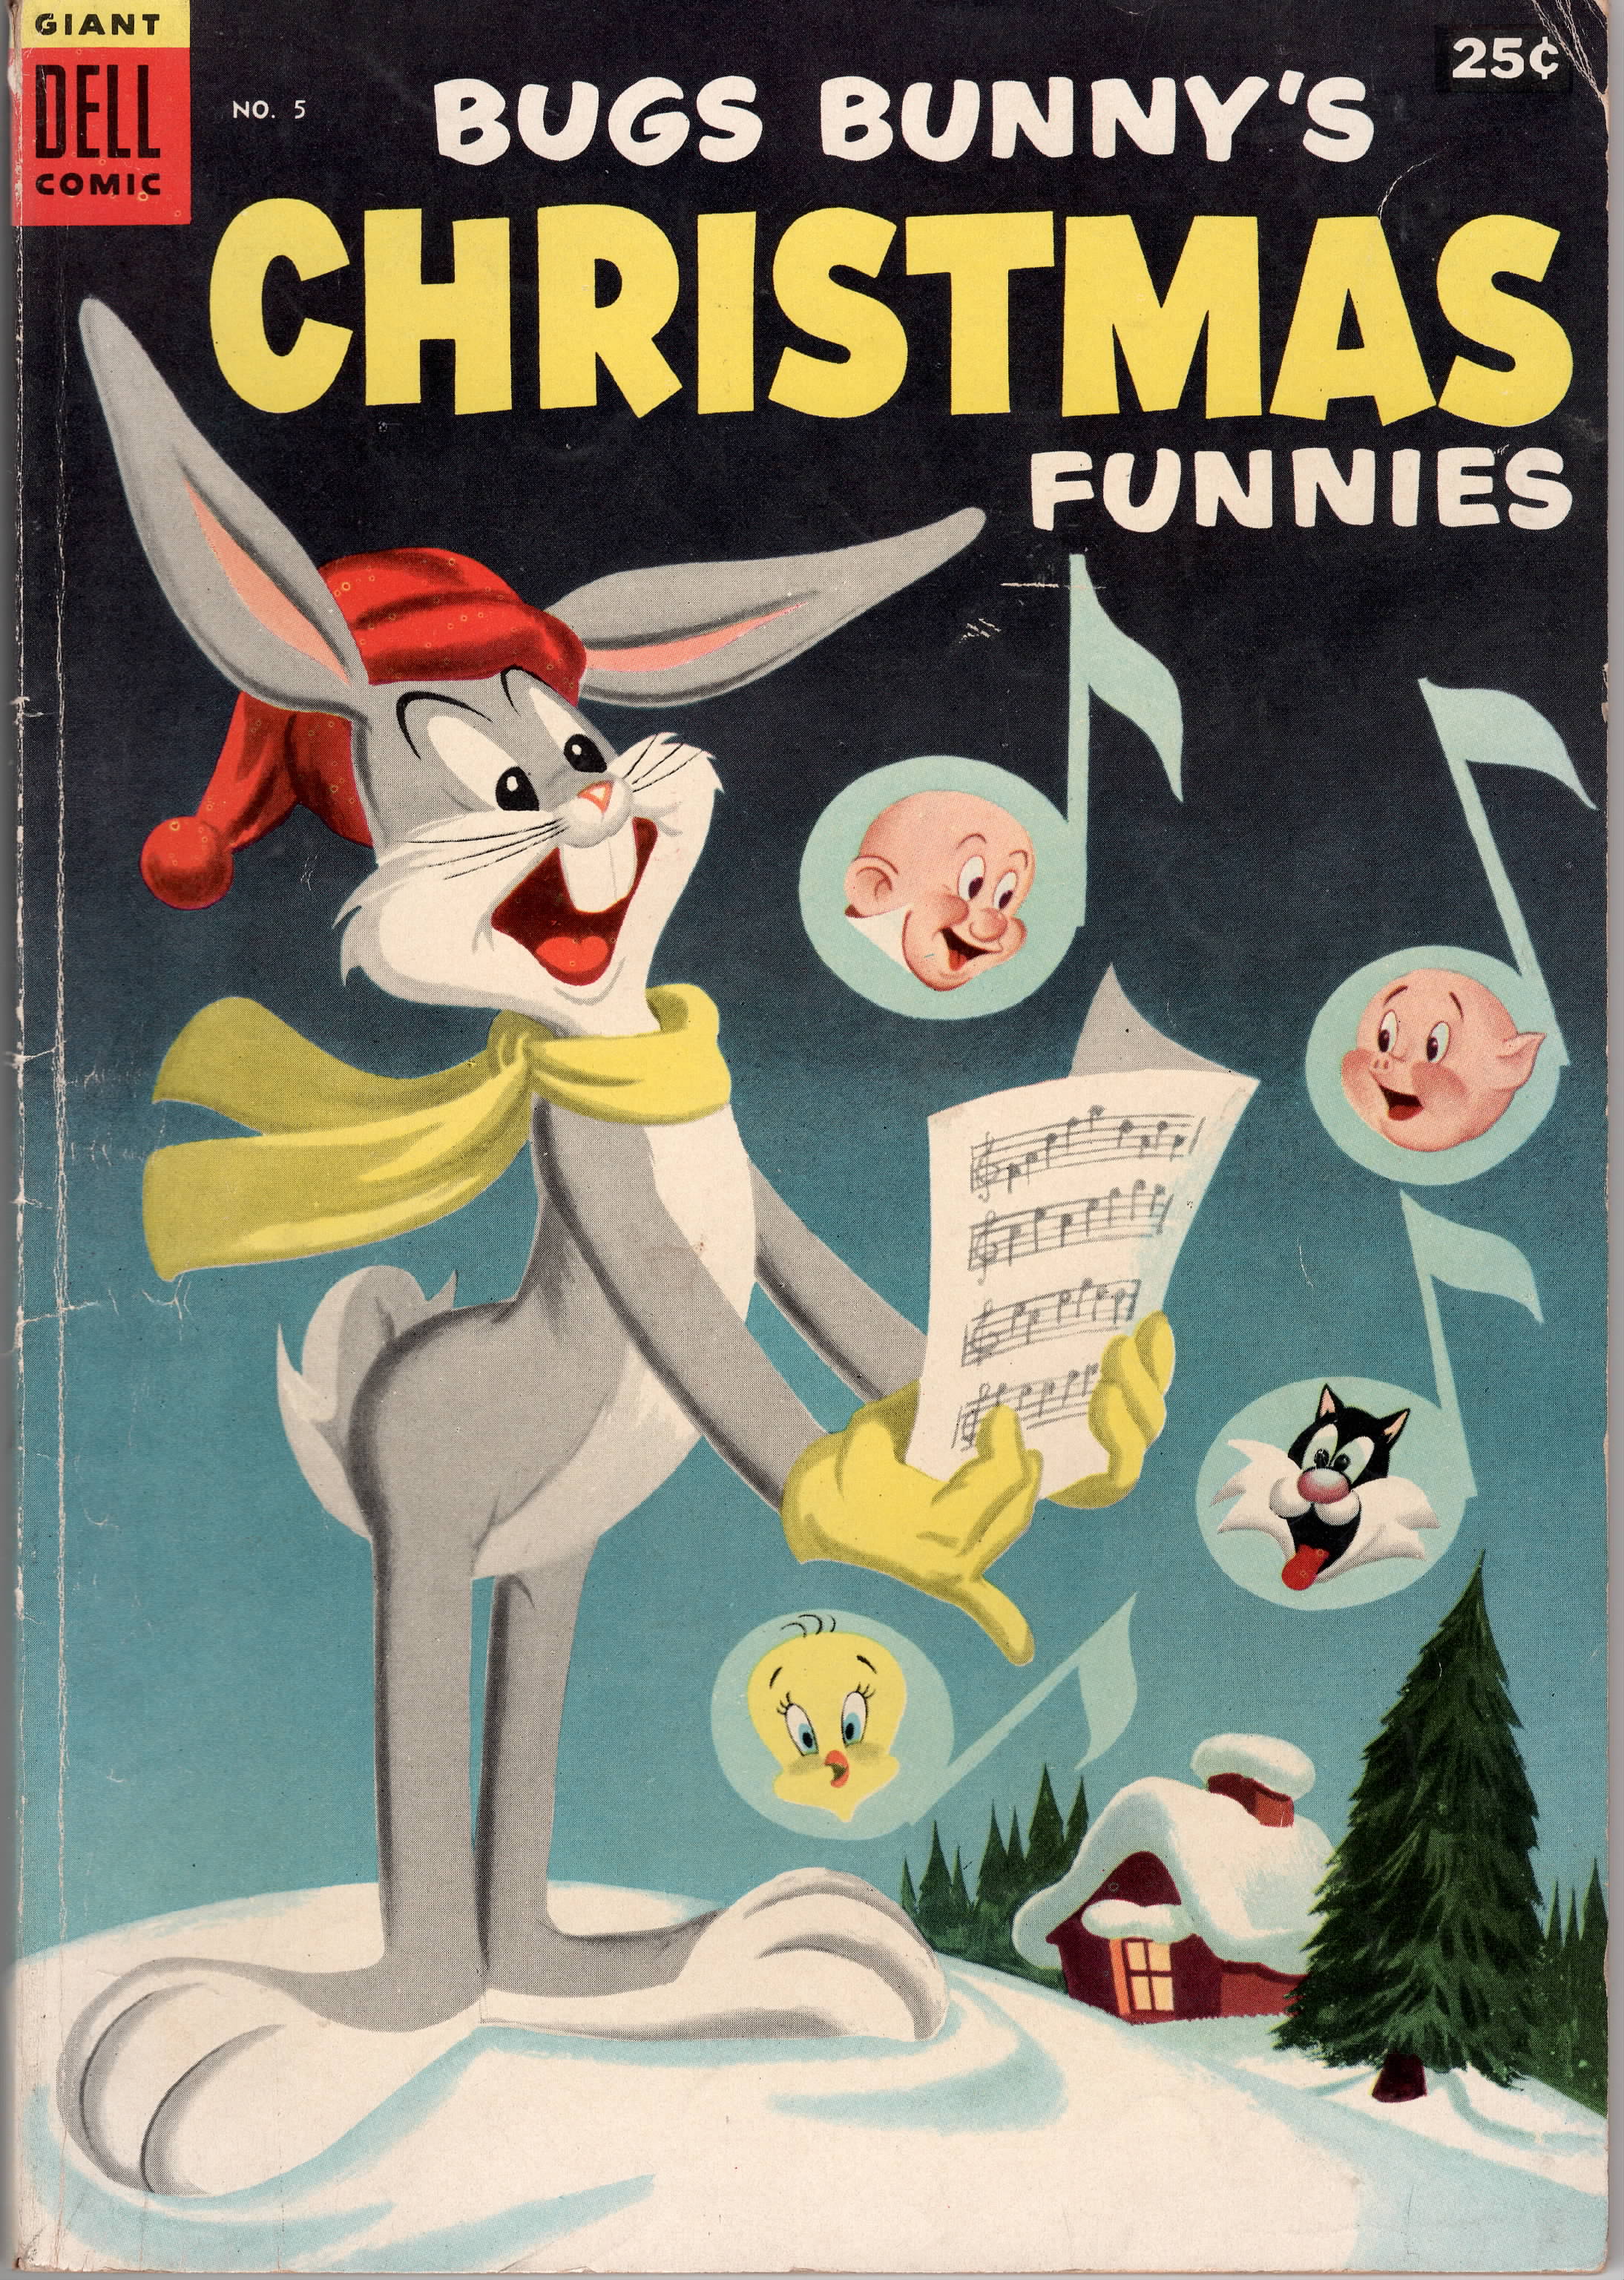 Dell Giant: Bugs Bunny's Christmas Funnies #5